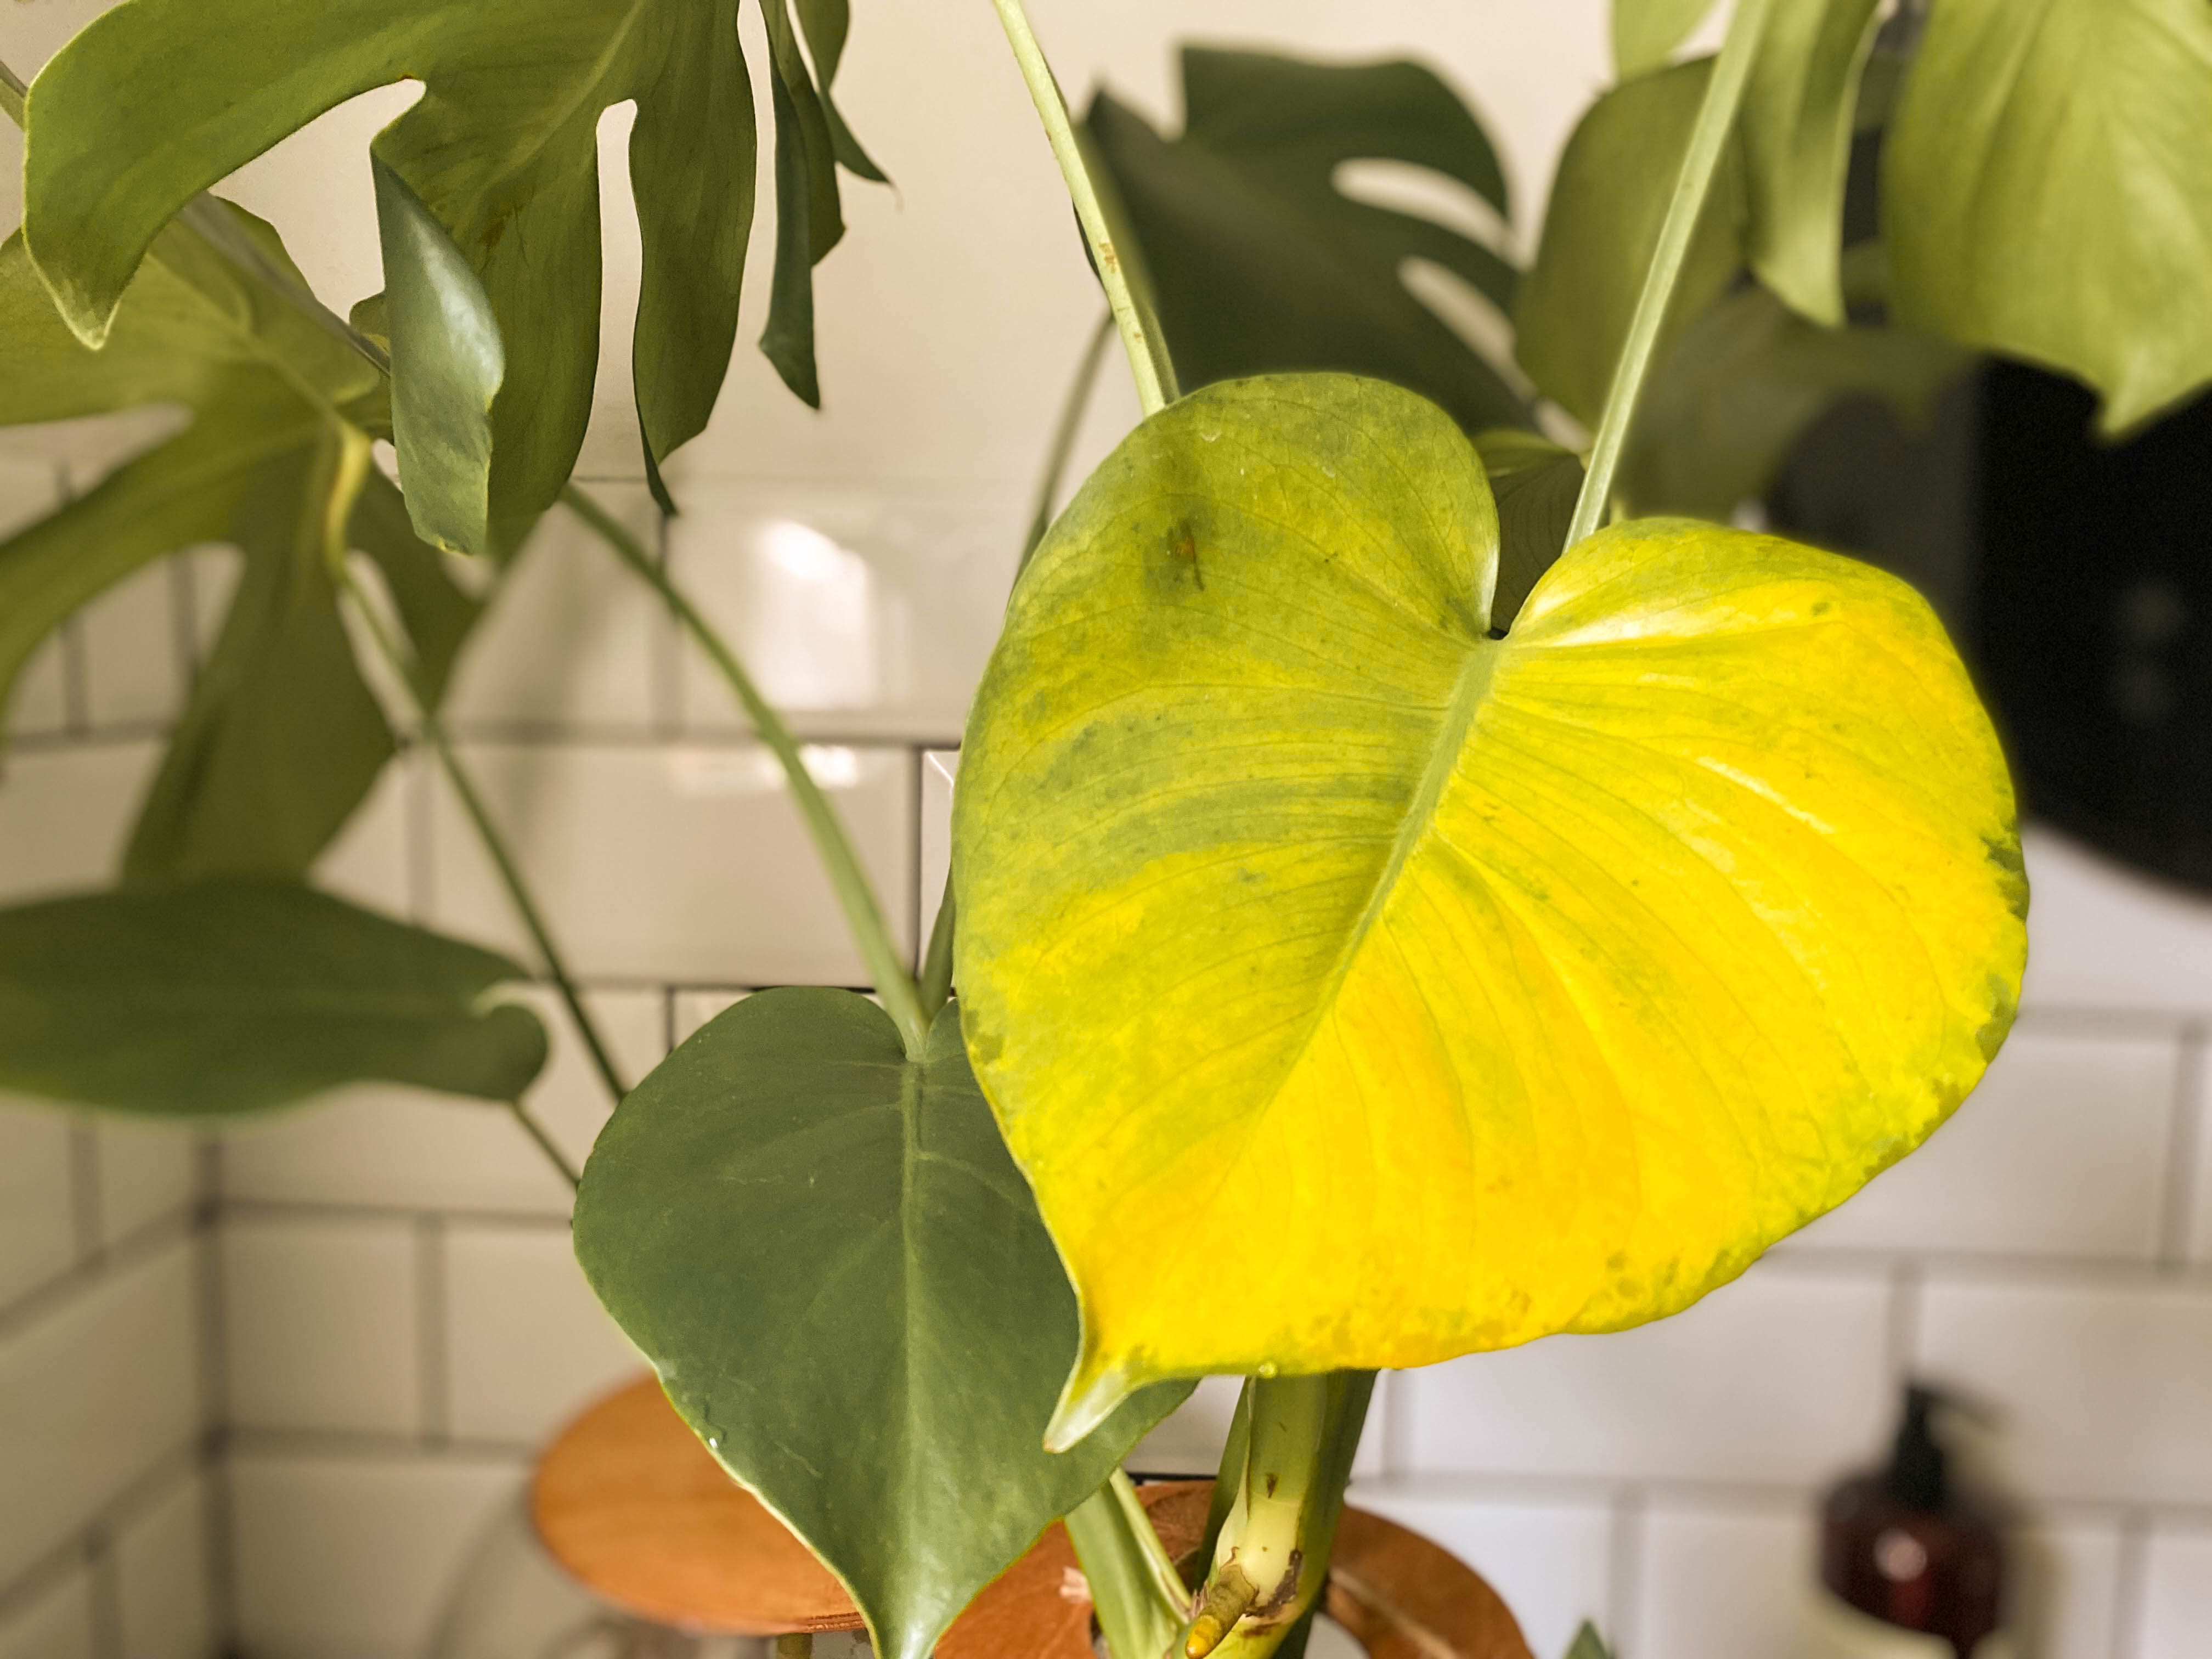 Monstera deliciosa plant with a yellow leaf